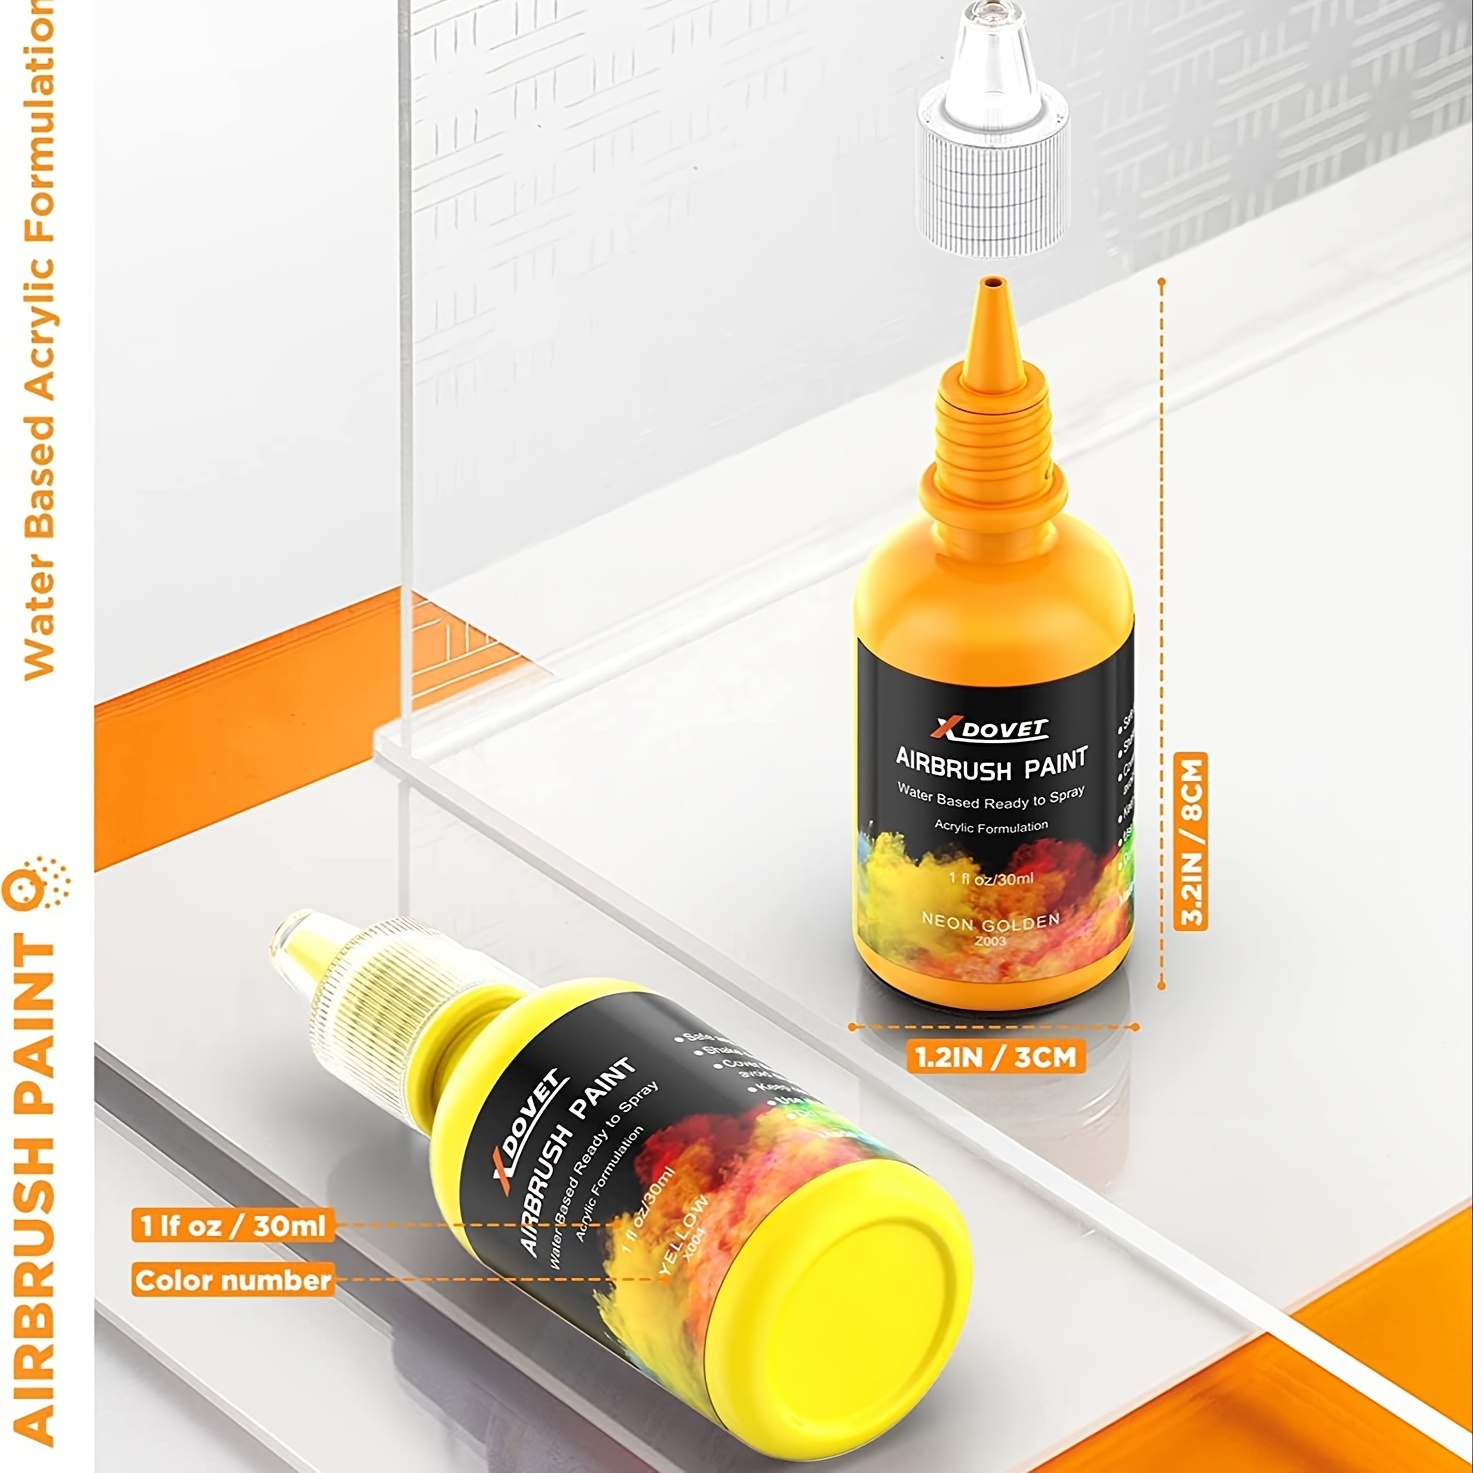 Acrylic Airbrush Scale Model Paint RAL 5002 30ml